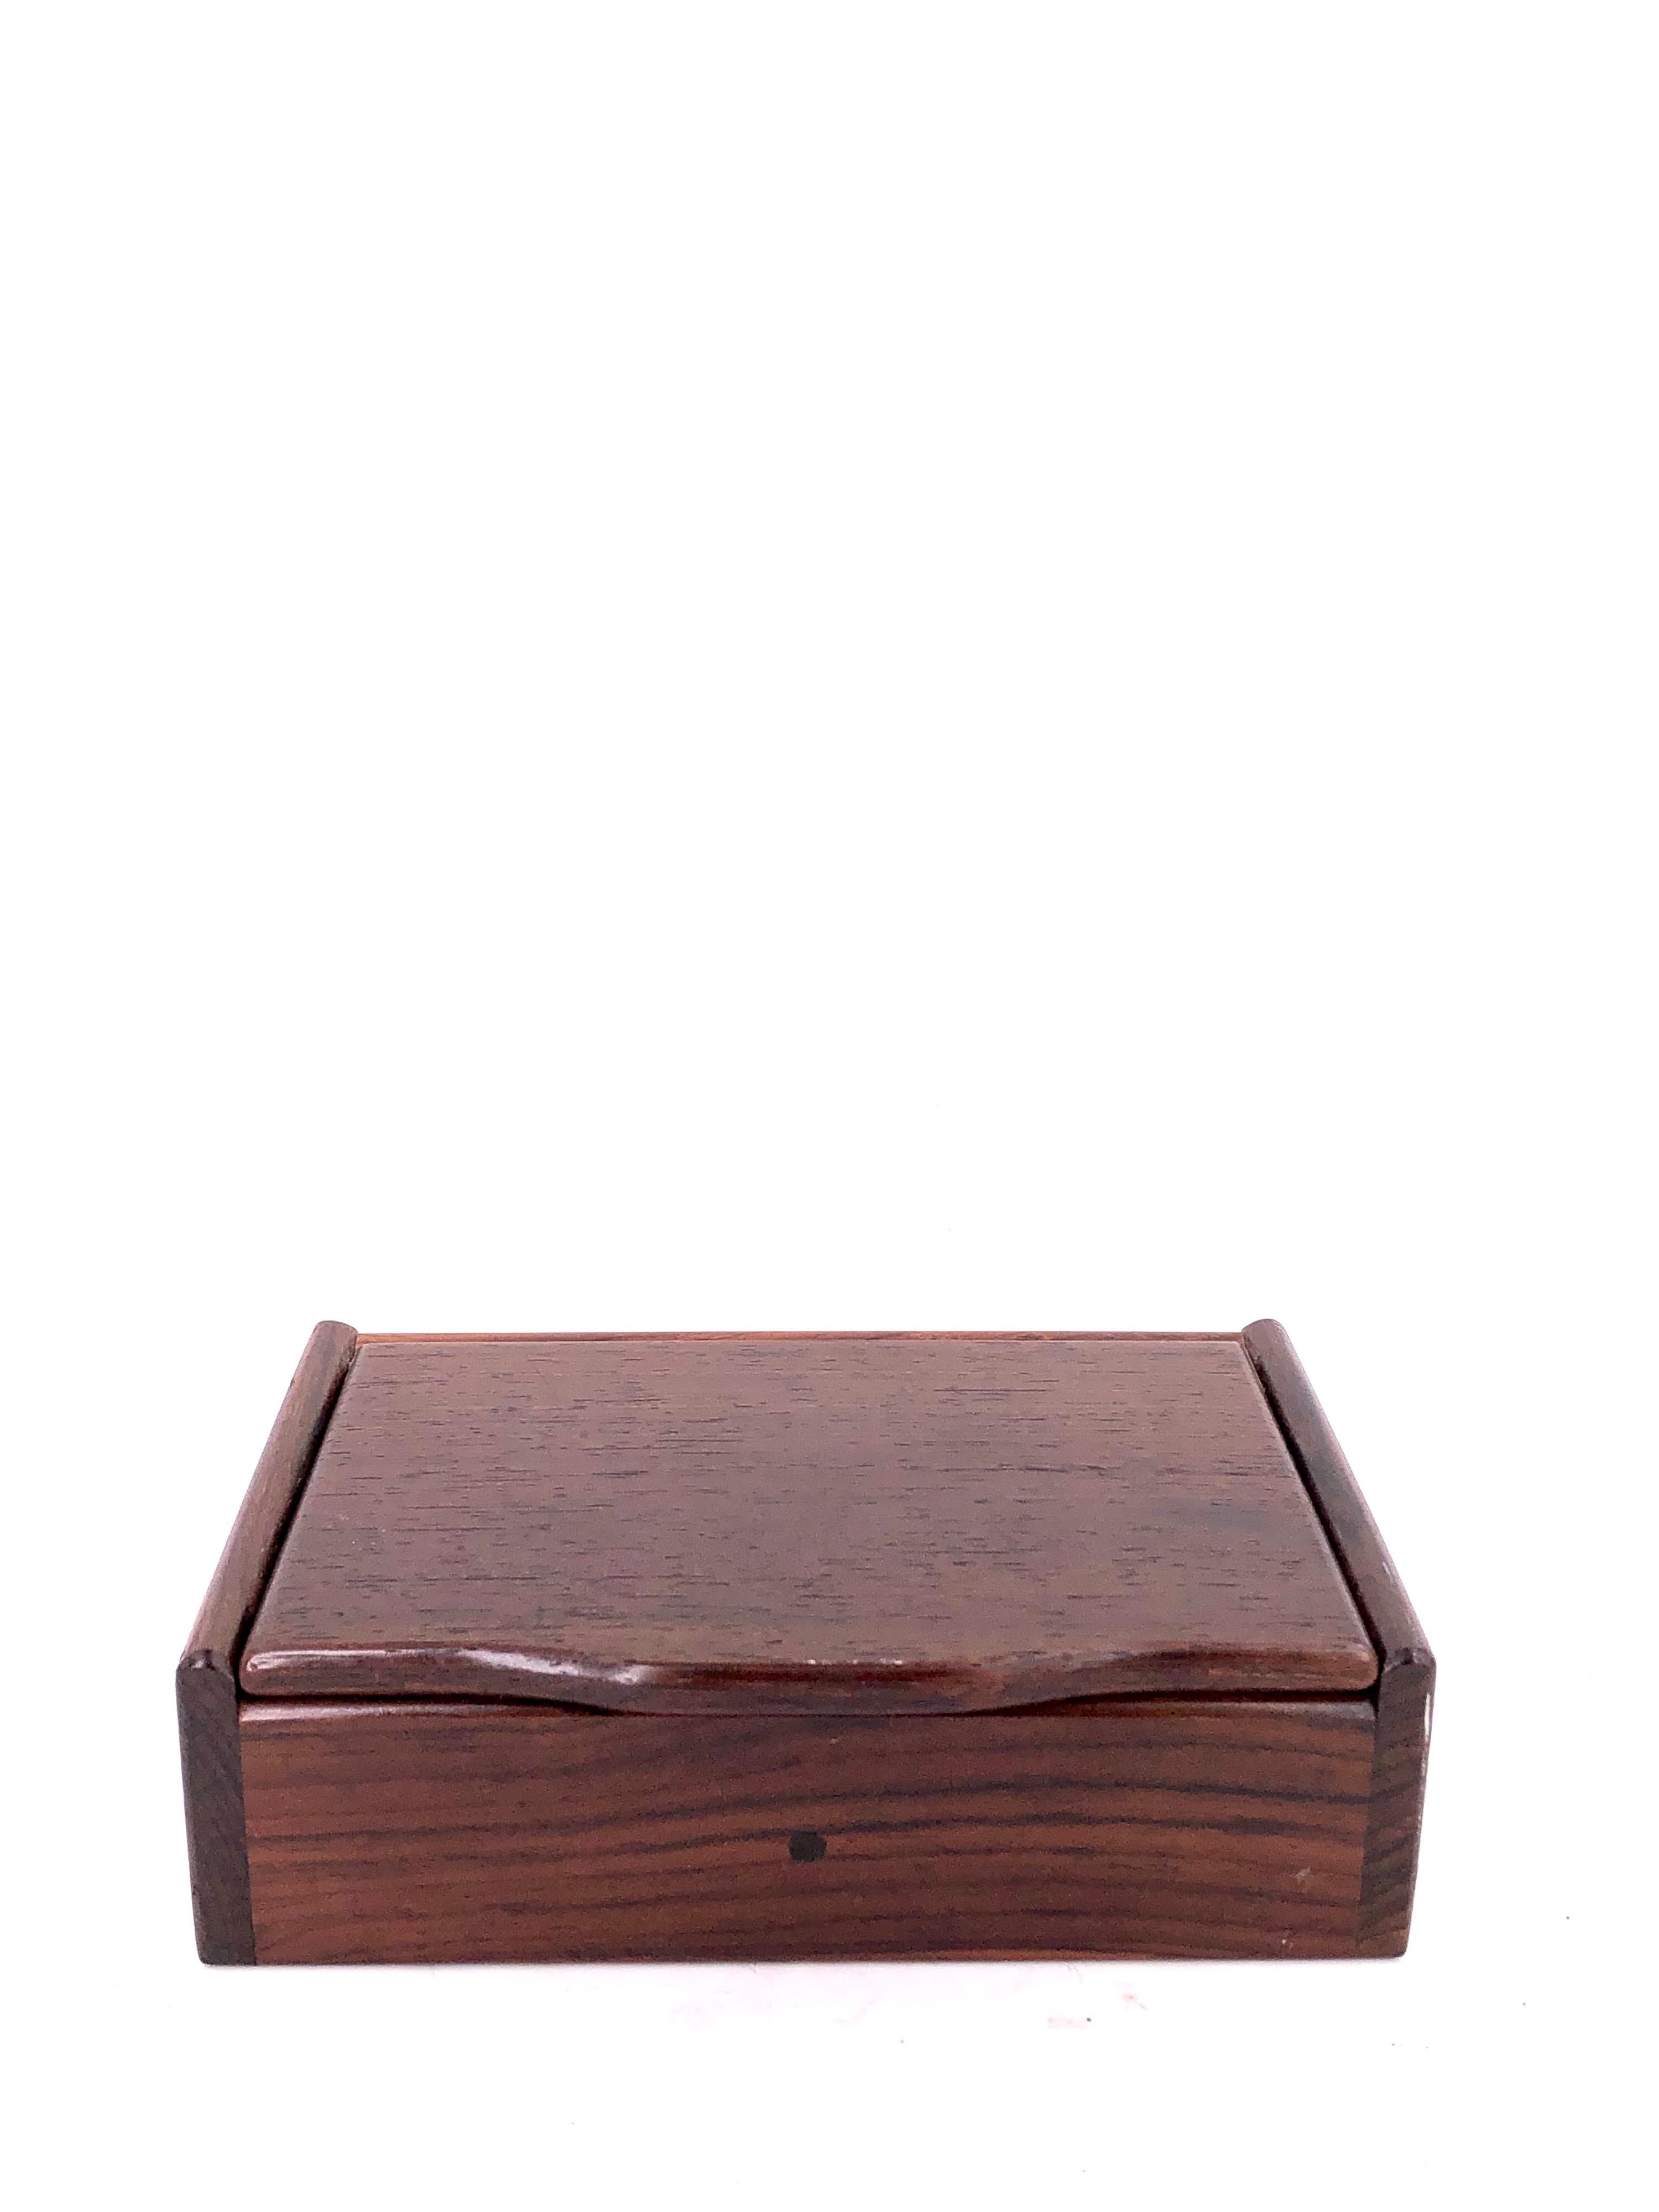 Mid-Century Modern American Handcrafted Rosewood Solid Wood Jewelry Box